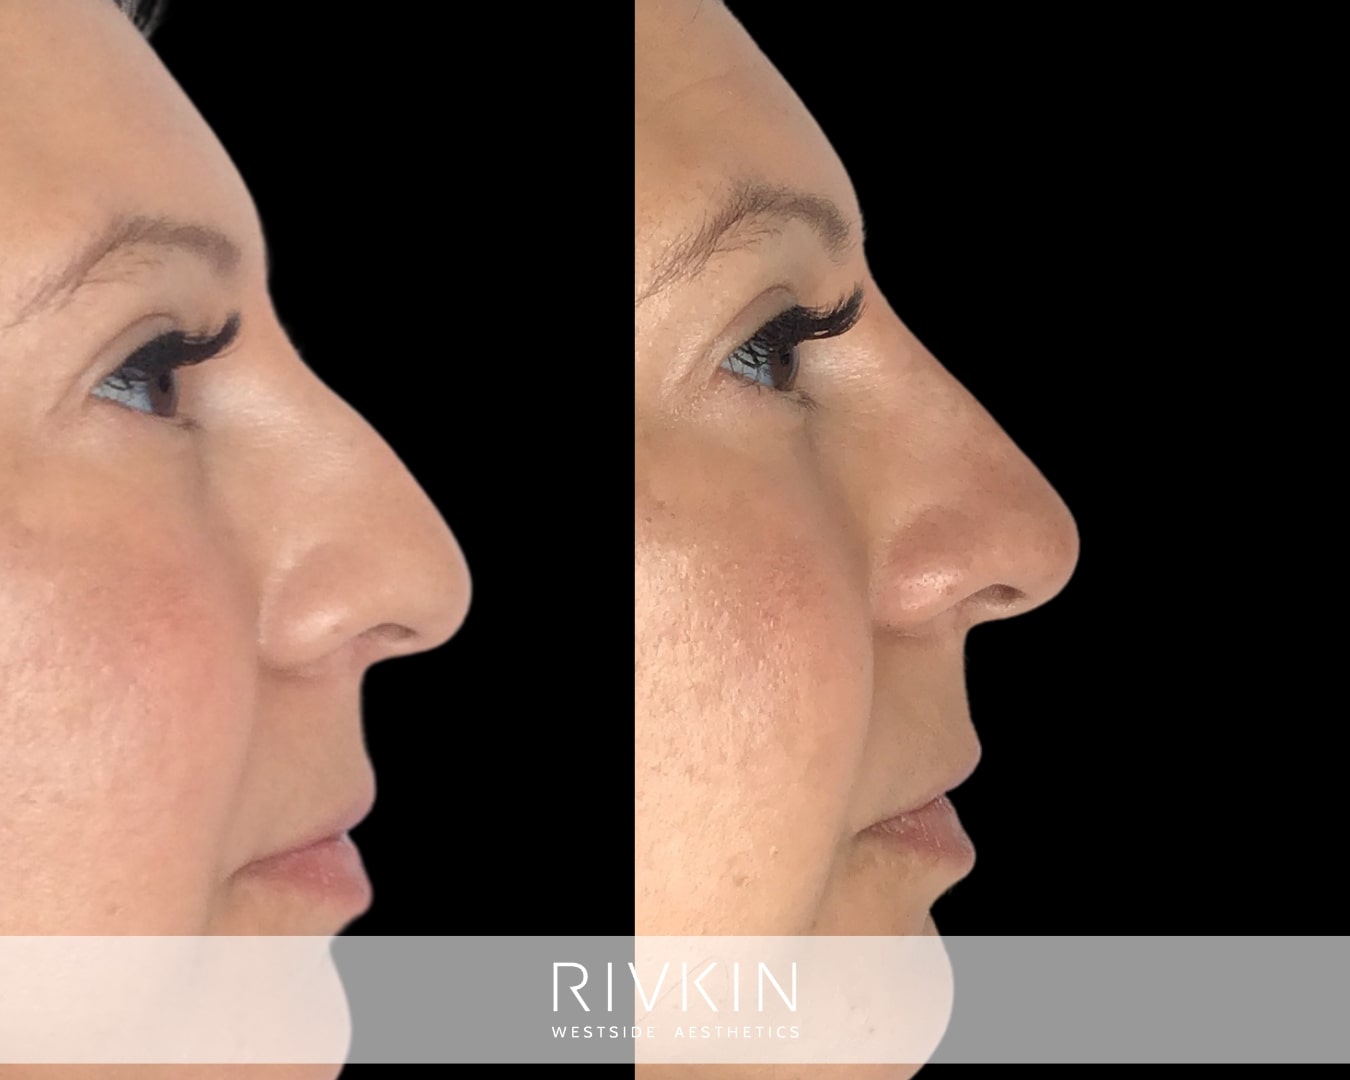 Uplifted and no longer droopy—how do you like her photo right after her liquid rhinoplasty procedure?